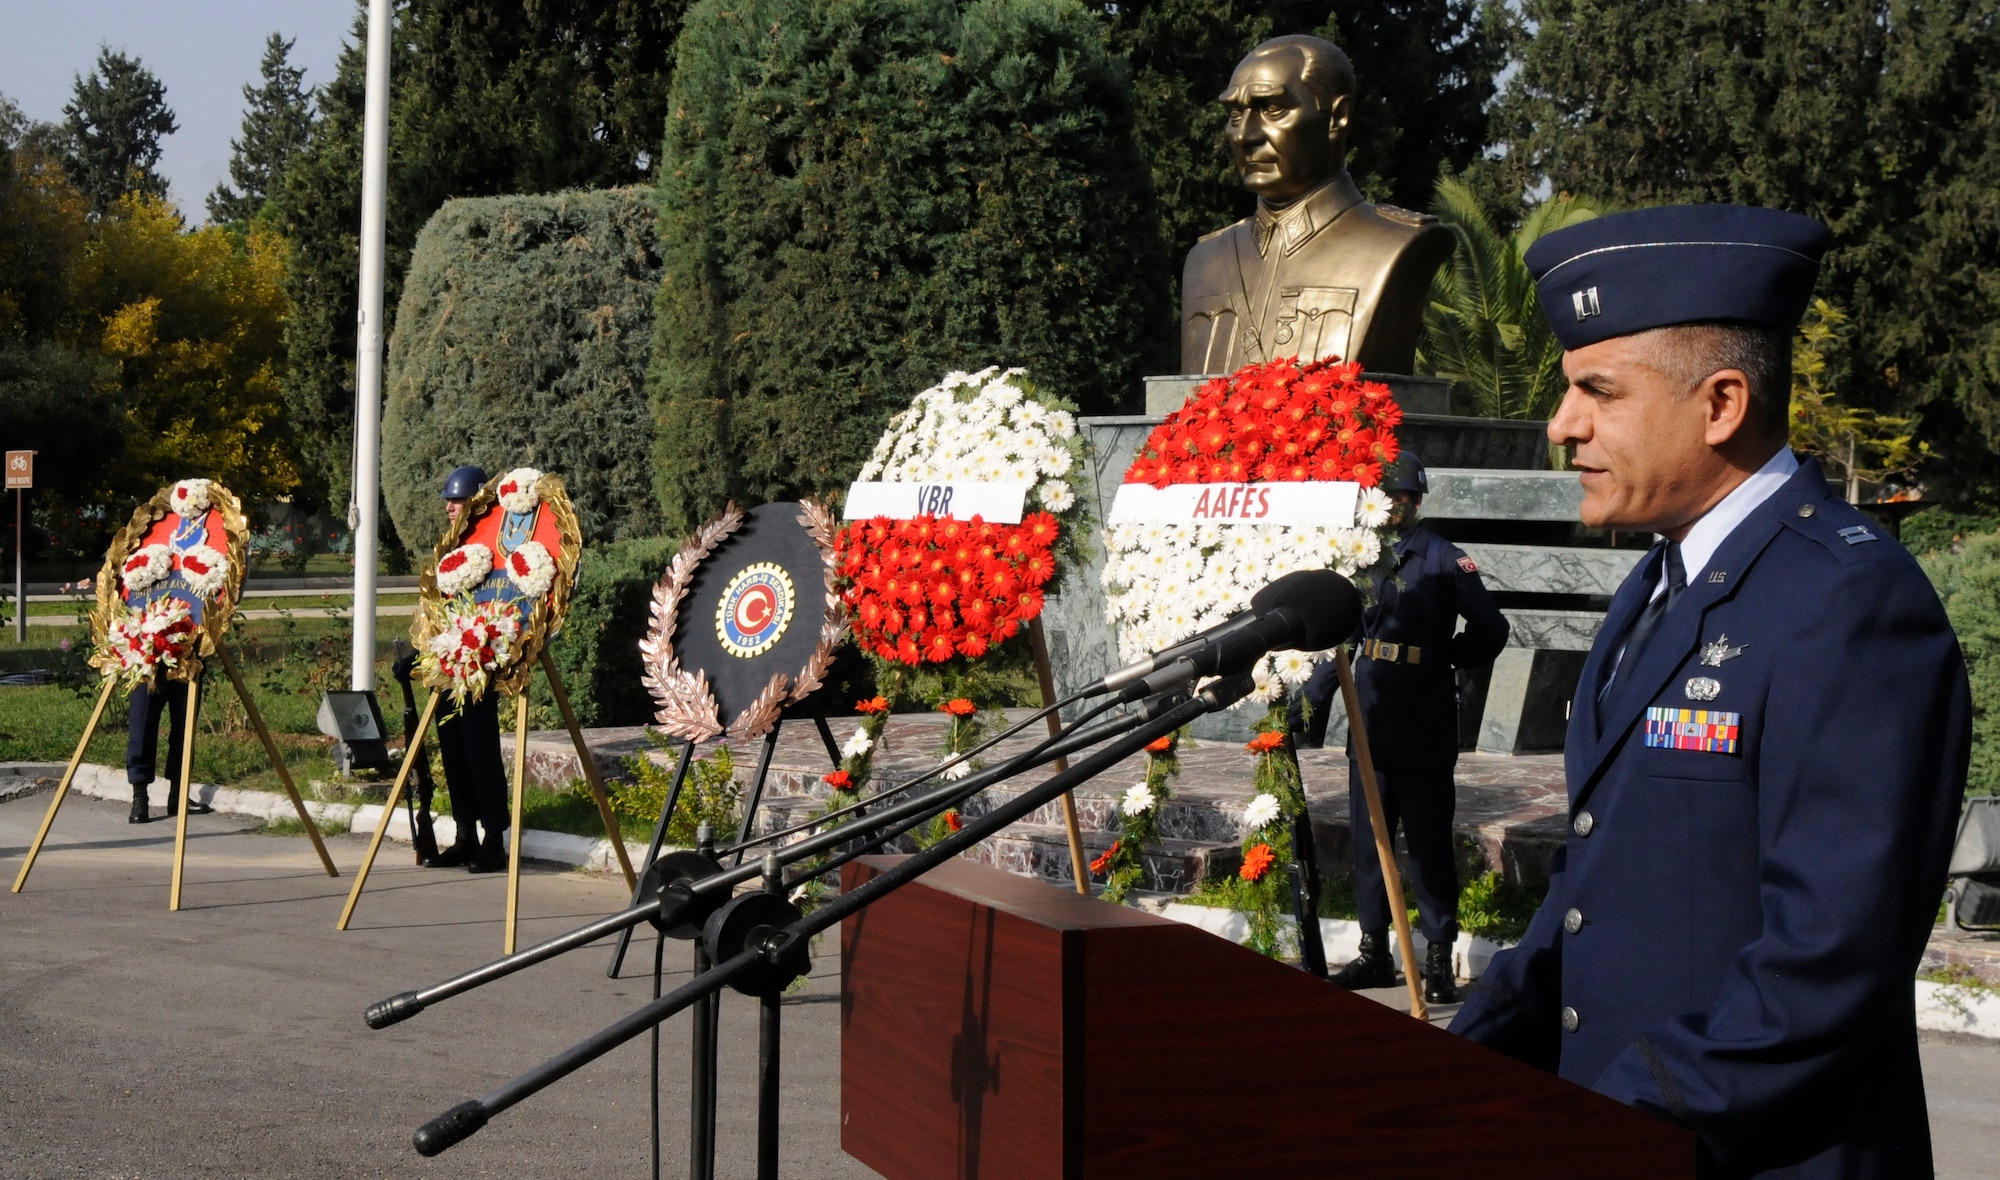 Capt. Marco Aminni, 39th Mission Support Group, speaks to Turkish and American Air Force members about the history of Mustafa Kemal Ataturk during the Ataturk Memorial Day Ceremony, Tuesday, Nov. 10, 2009 in front of the 10th Tanker Base Command Headquarters. The ceremony was open to all members of the Incirlik community.  (U.S. Air Force photo/Airman 1st Class Amber Ashcraft)